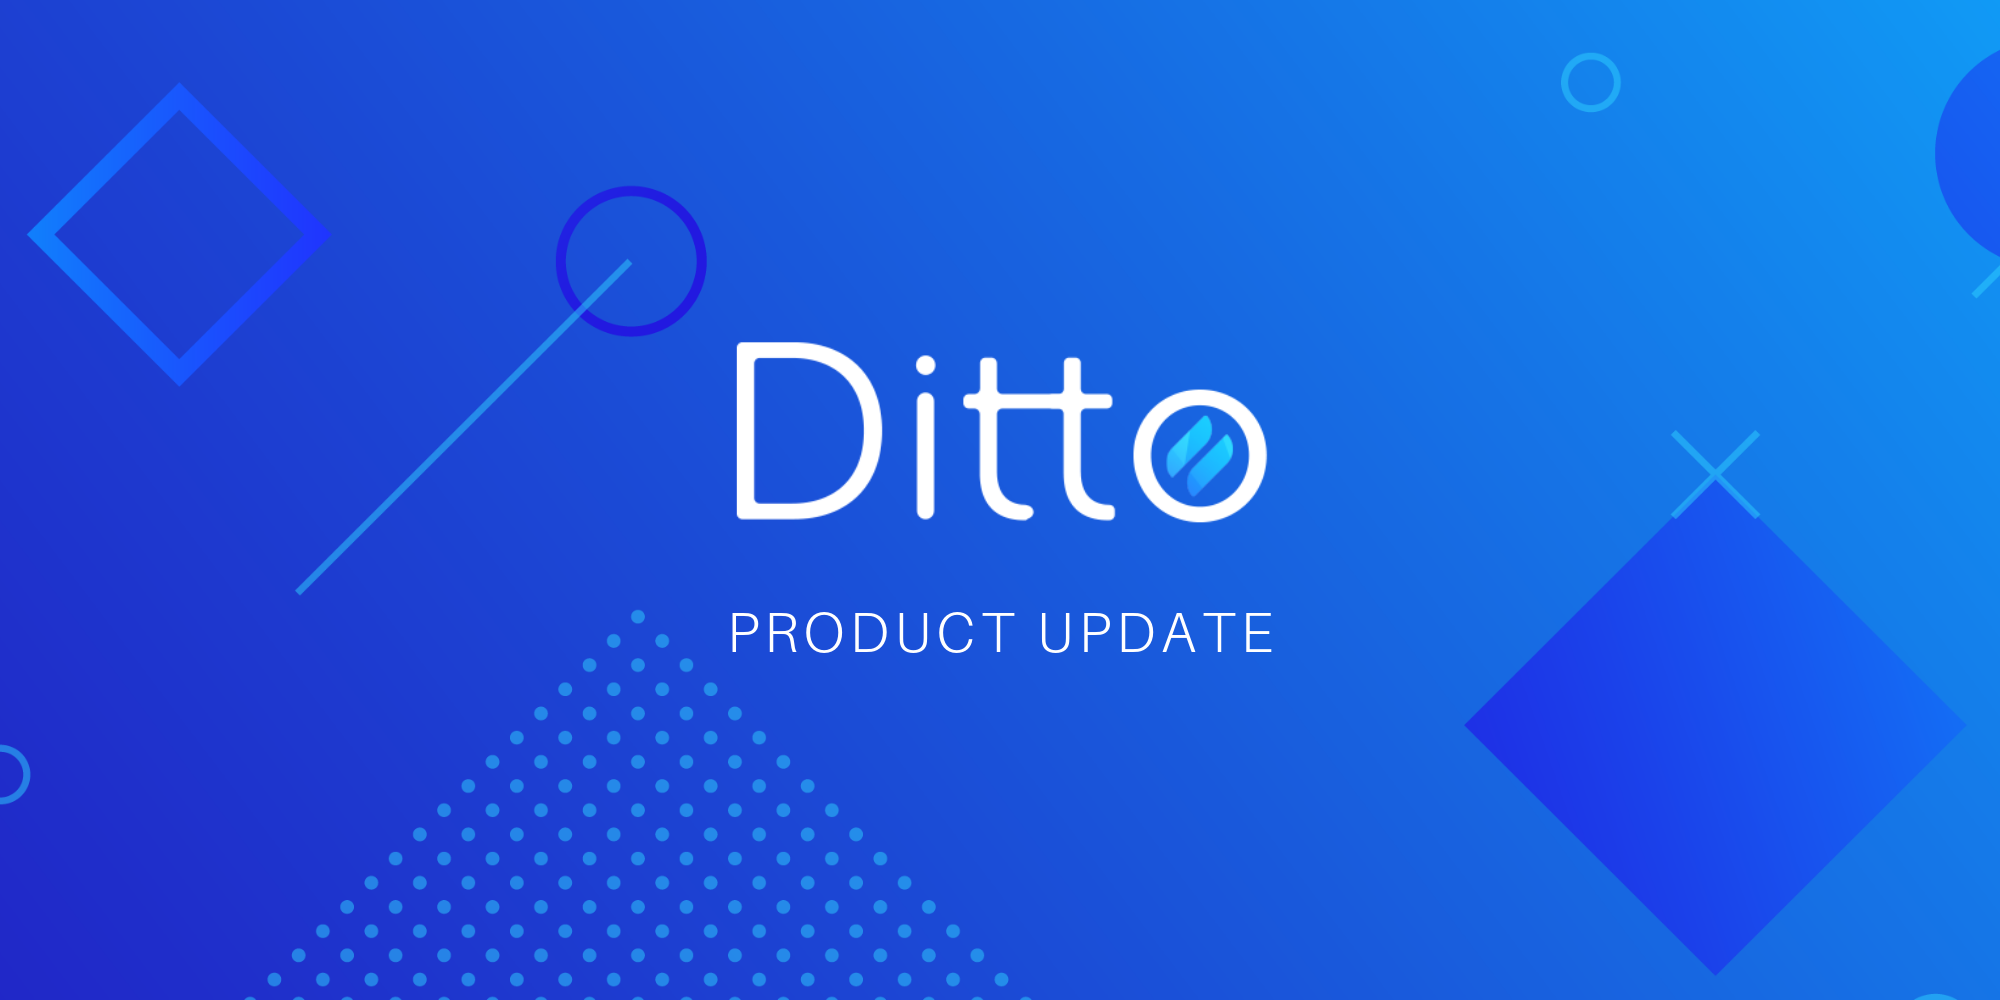 Ditto Update Introduces Deployment, Reporting Features - Featured Image